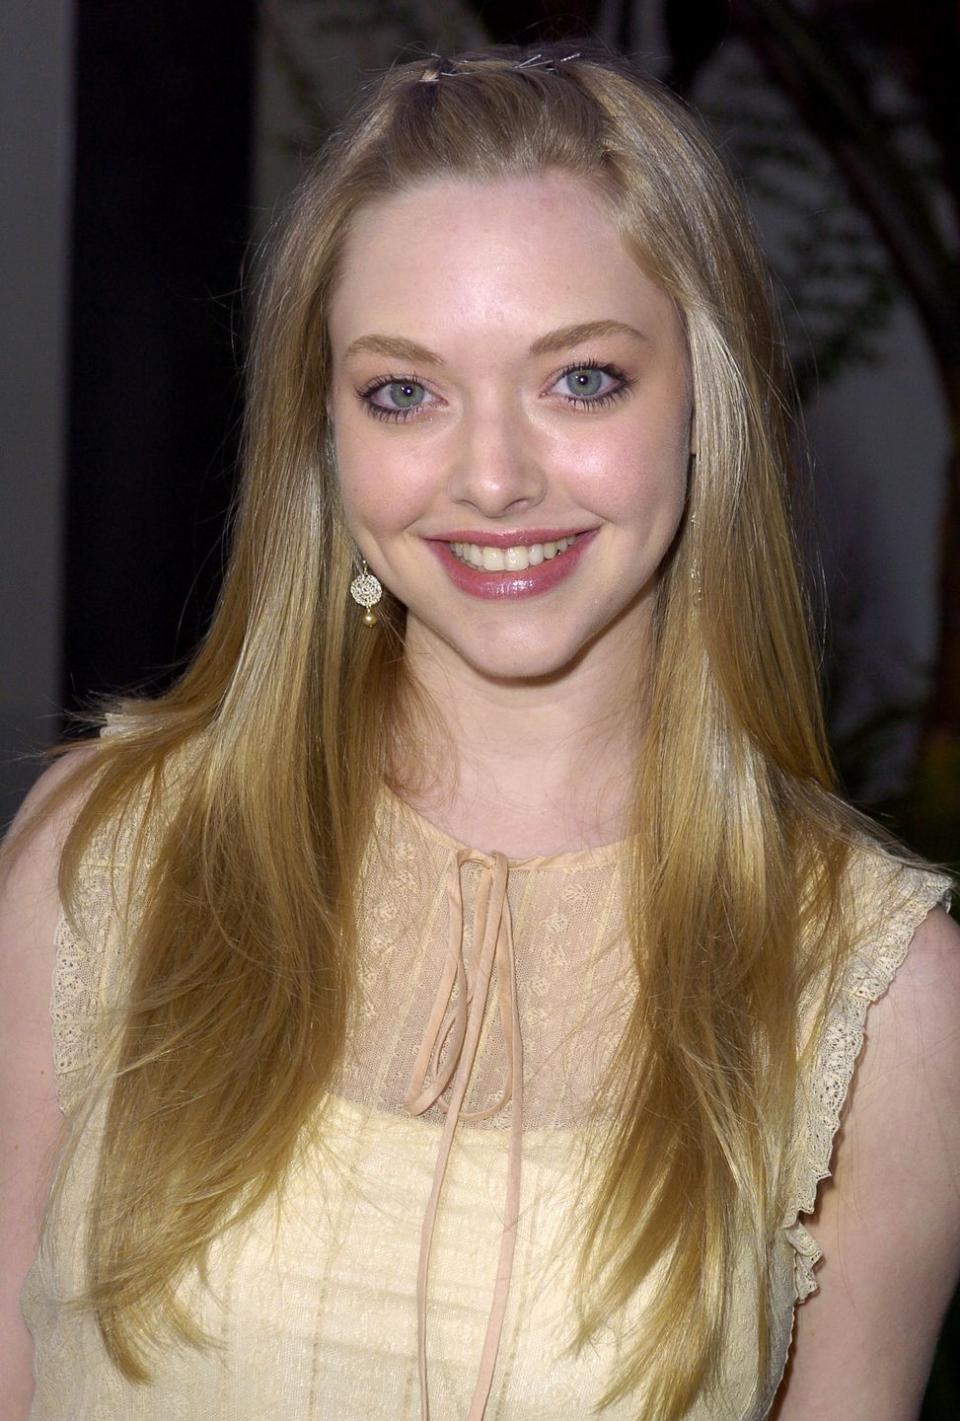 Amanda Seyfried also auditioned for the title role.